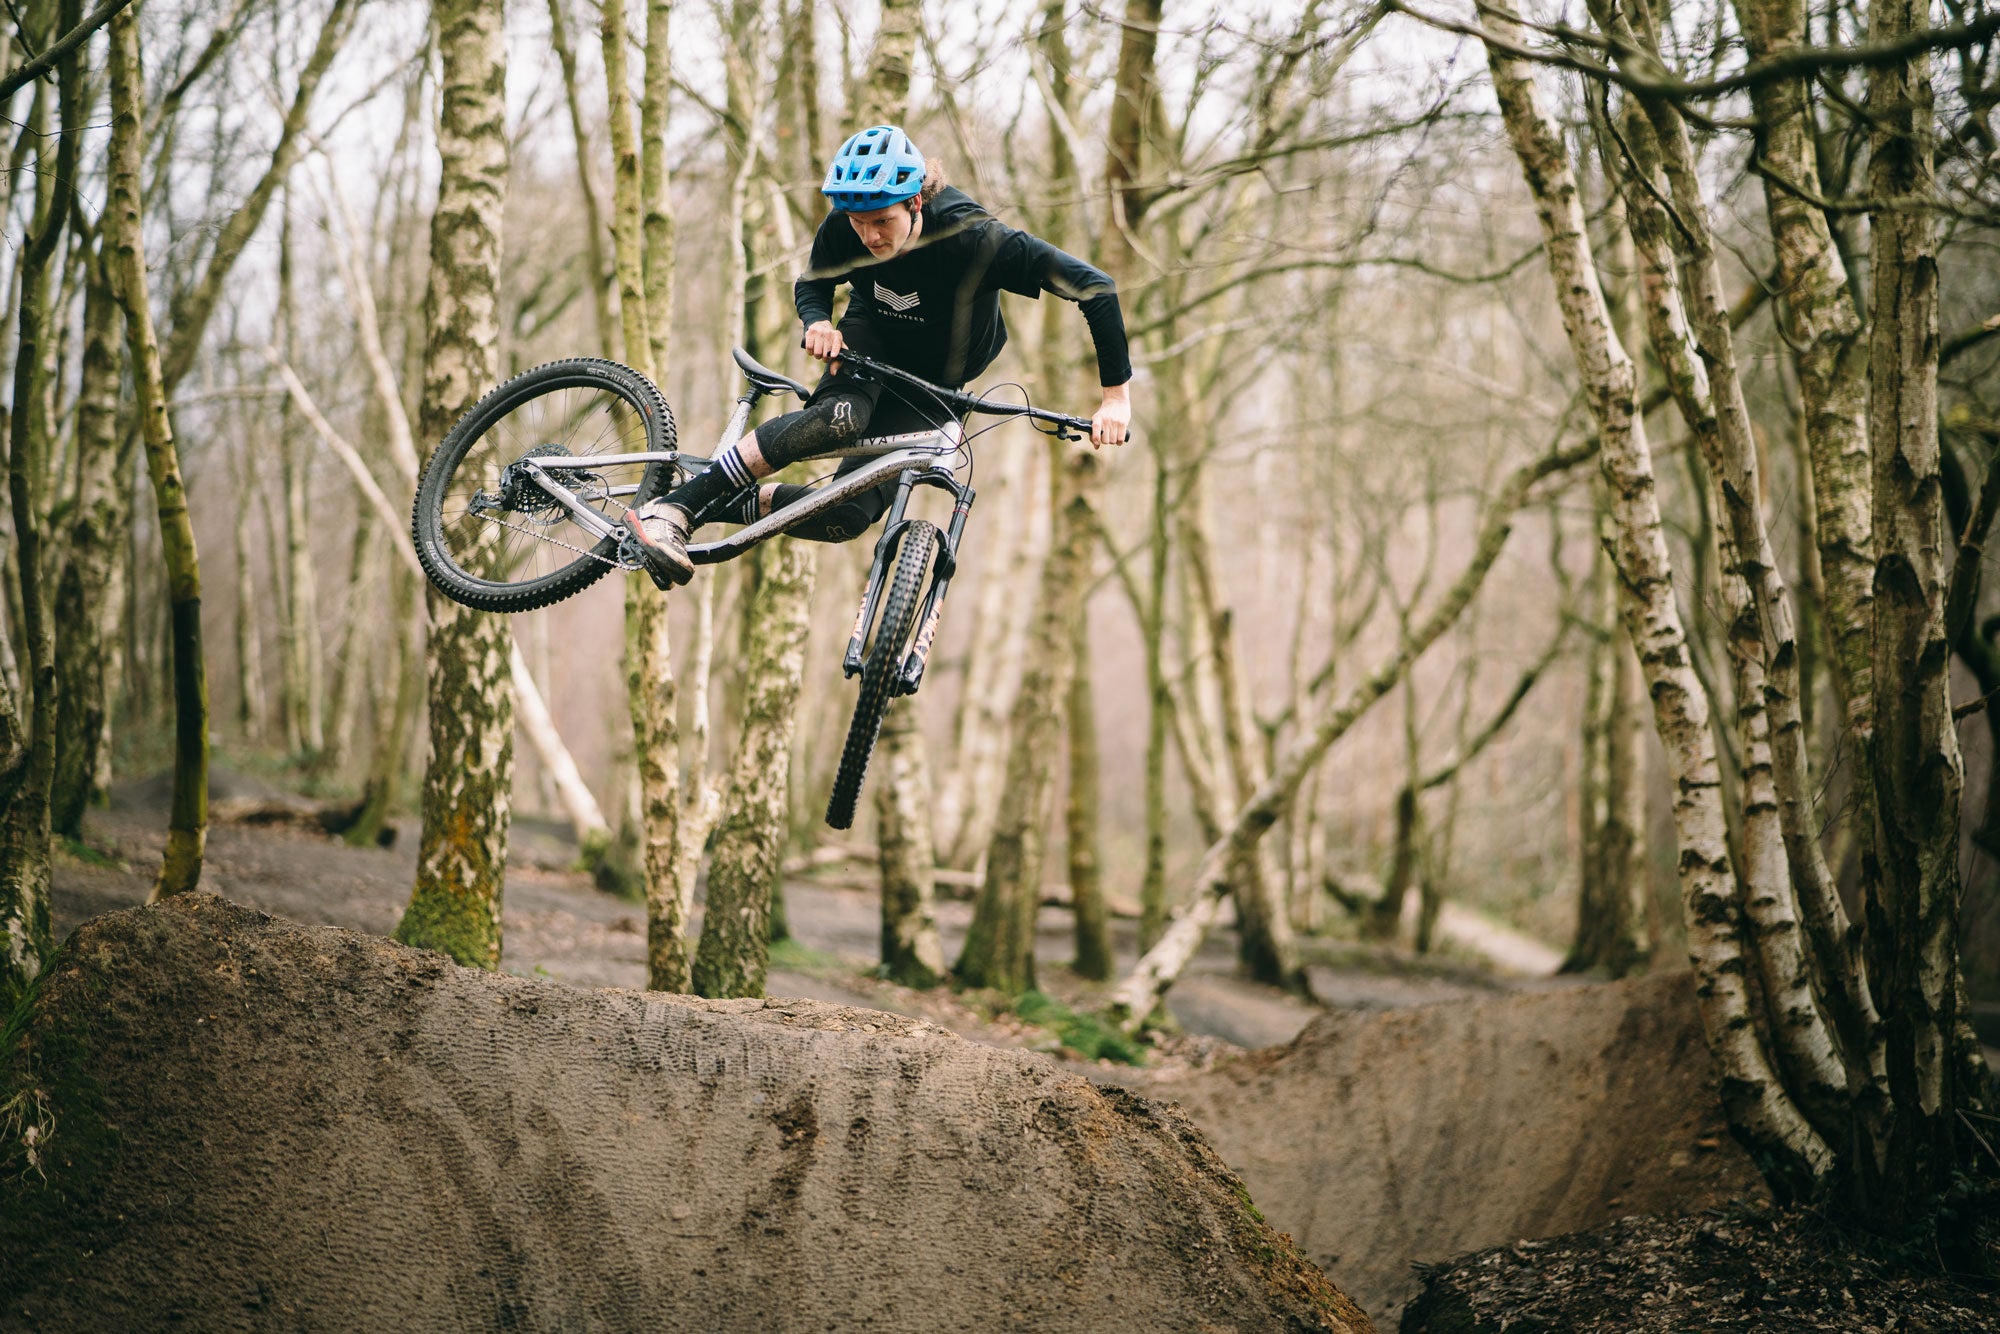 <h1>Made for where you ride</h1><i>From the rock and root strewn decent, to the white-knuckle inducing jump trails; we wanted to create a series of wheelsets tailored for your Enduro riding.</i>